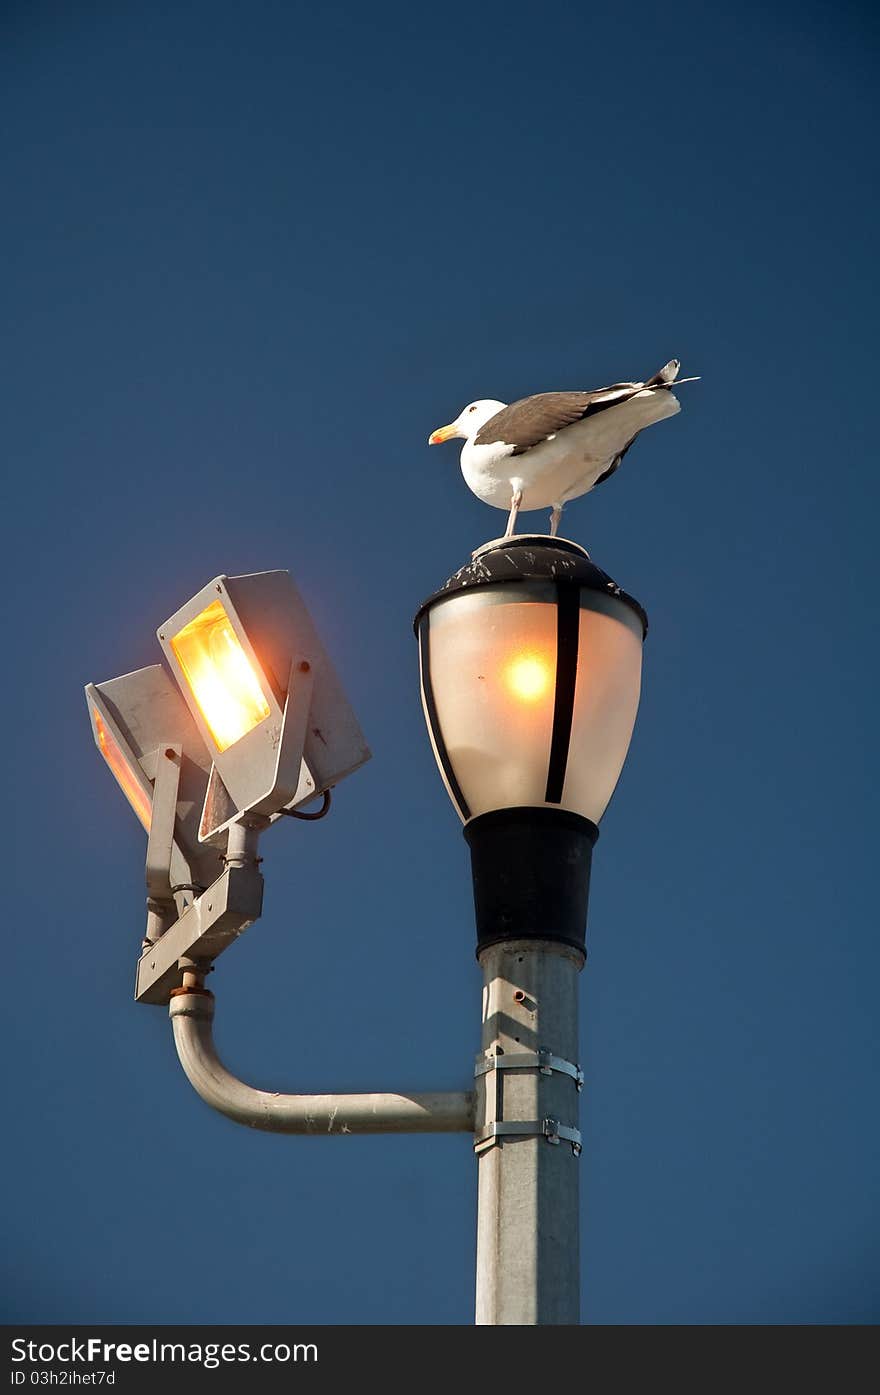 Sea-gull sitting on a street lamp, clear blue sky in background